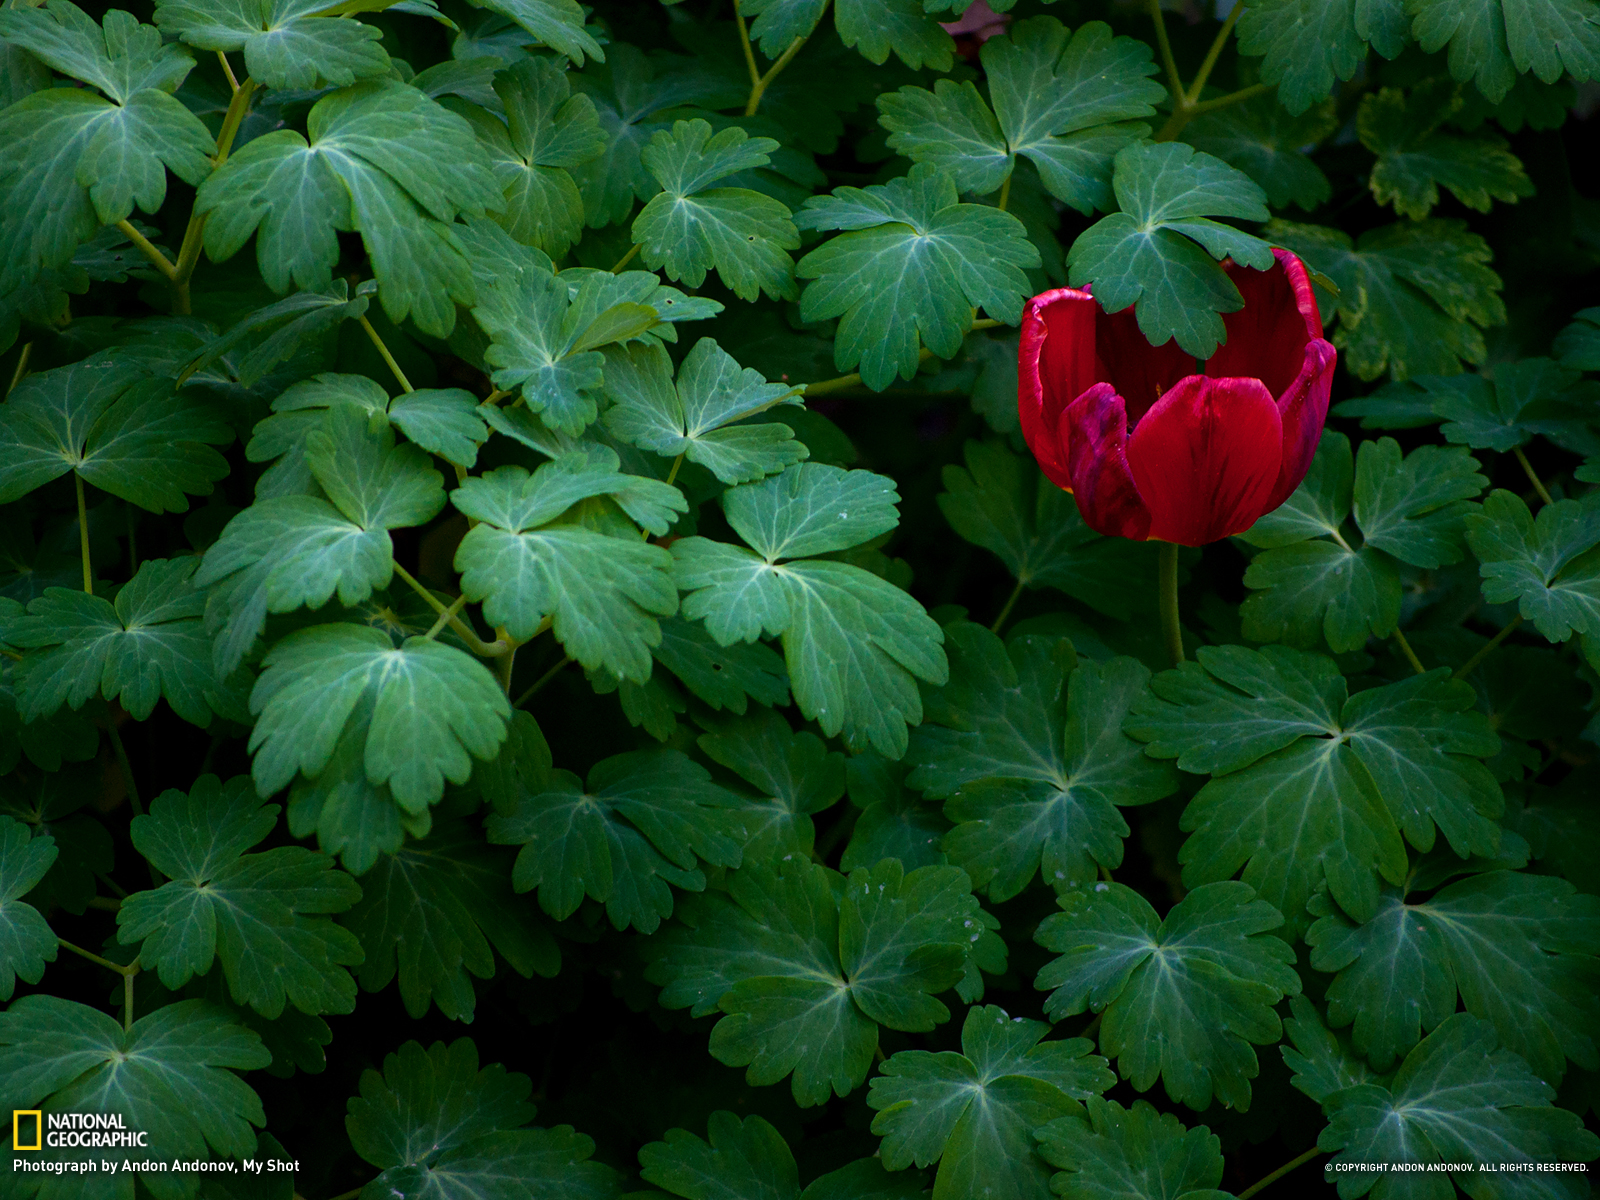 Tulip Picture Flower Wallpaper National Geographic Photo Of The